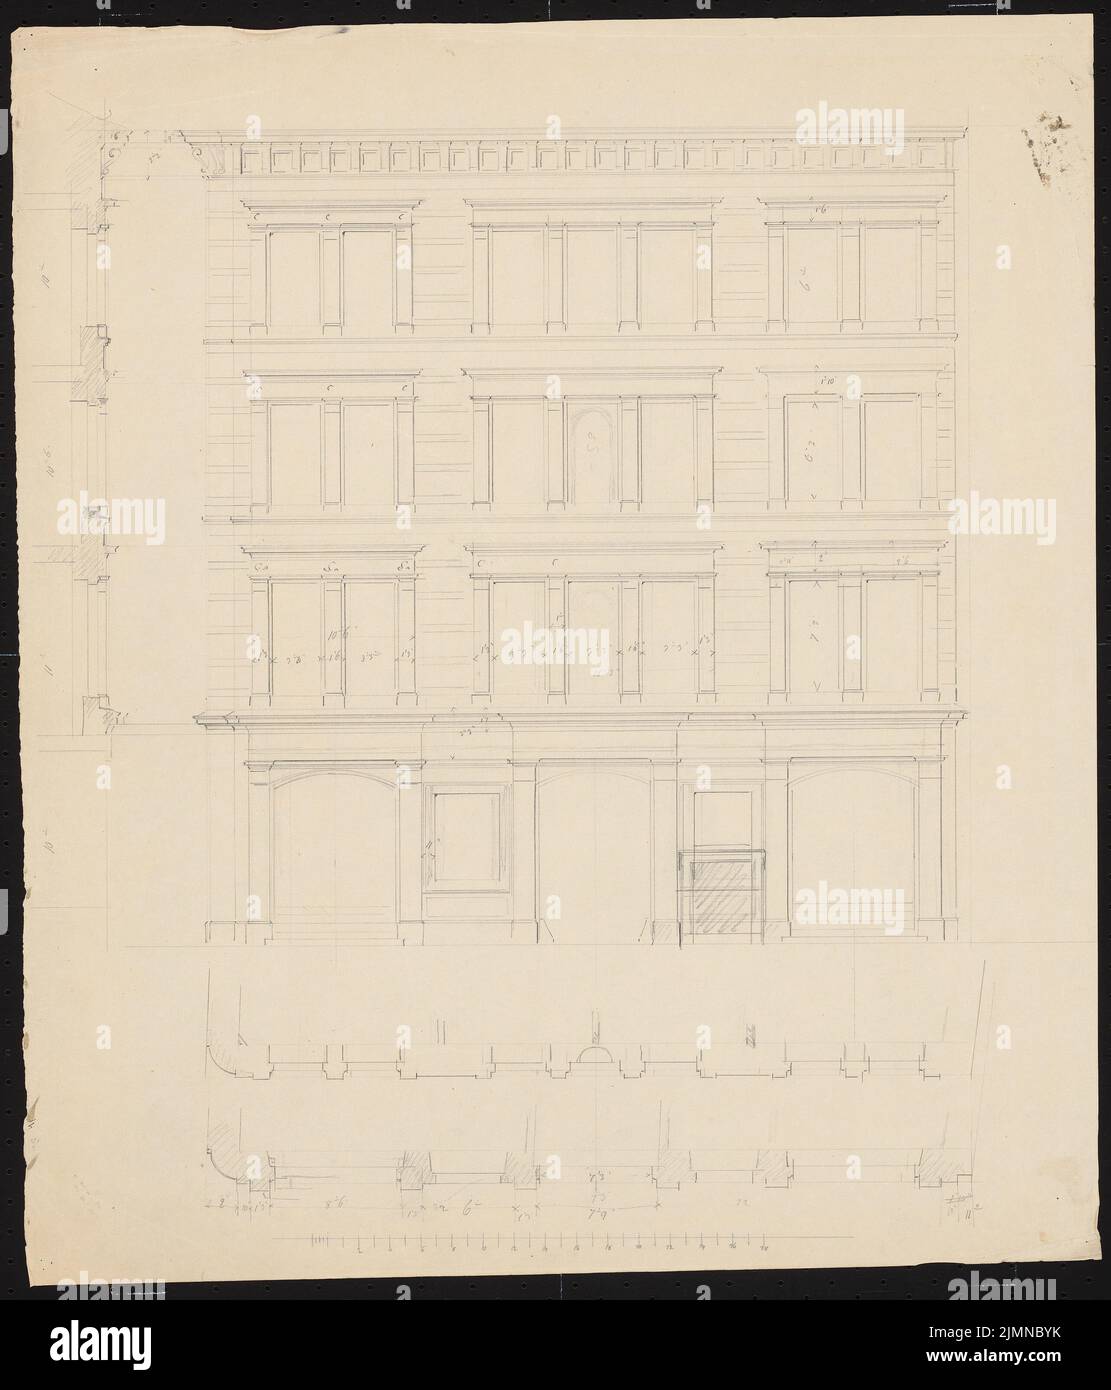 Knoblauch Eduard (1801-1865), four-storey apartment building with a seven-axle road front (before 1848): front view. Pencil, 60.9 x 52.1 cm (including scan edges) Stock Photo